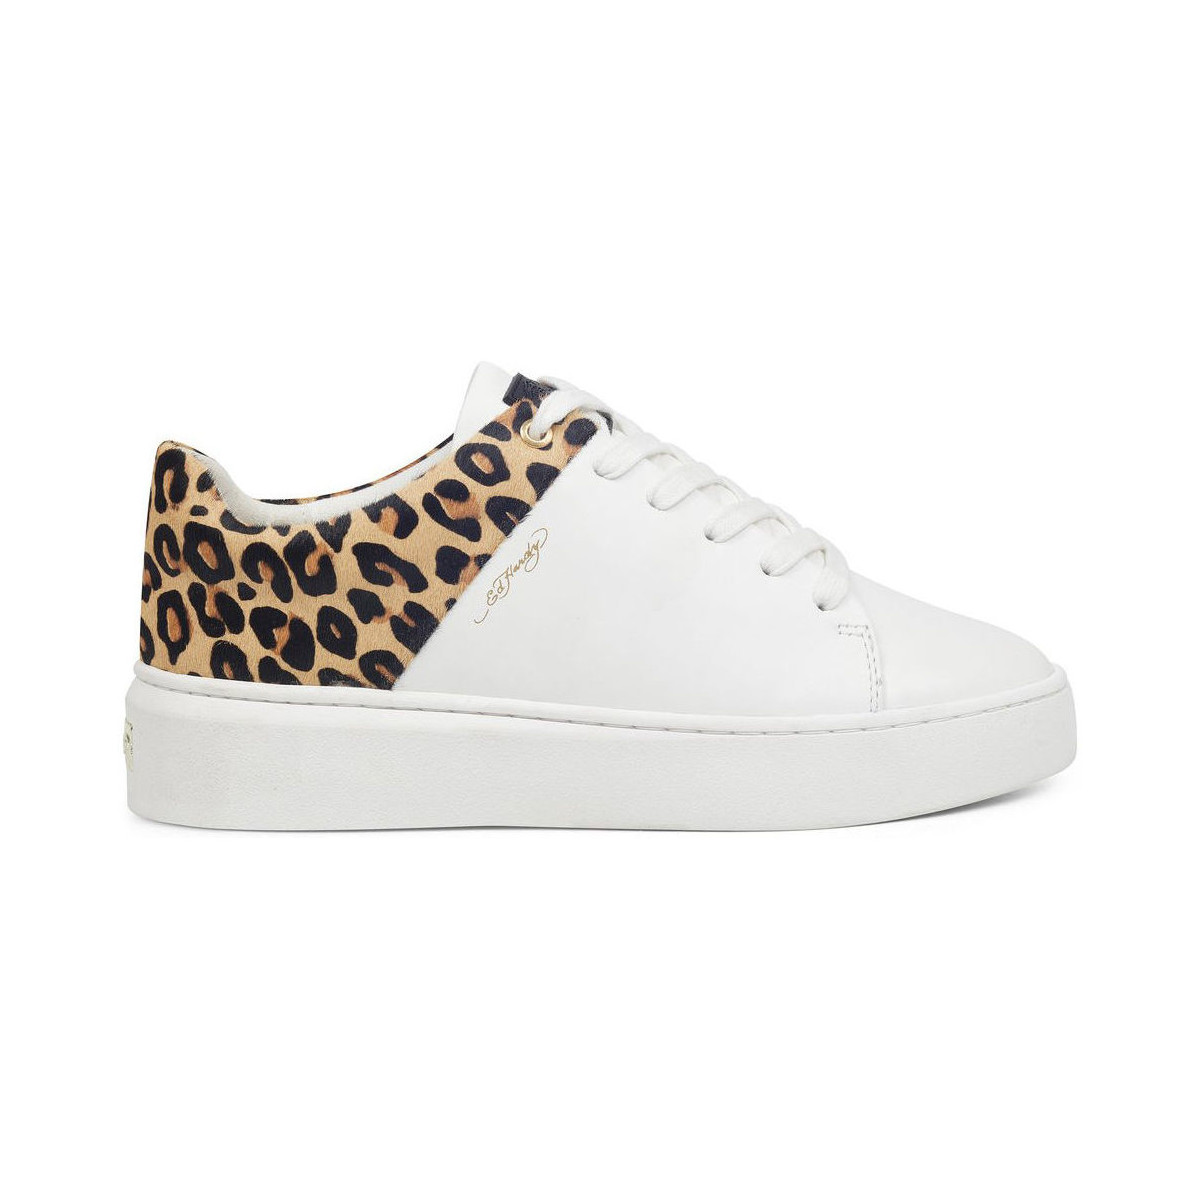 Xαμηλά Sneakers Ed Hardy – Wild low top white leopard